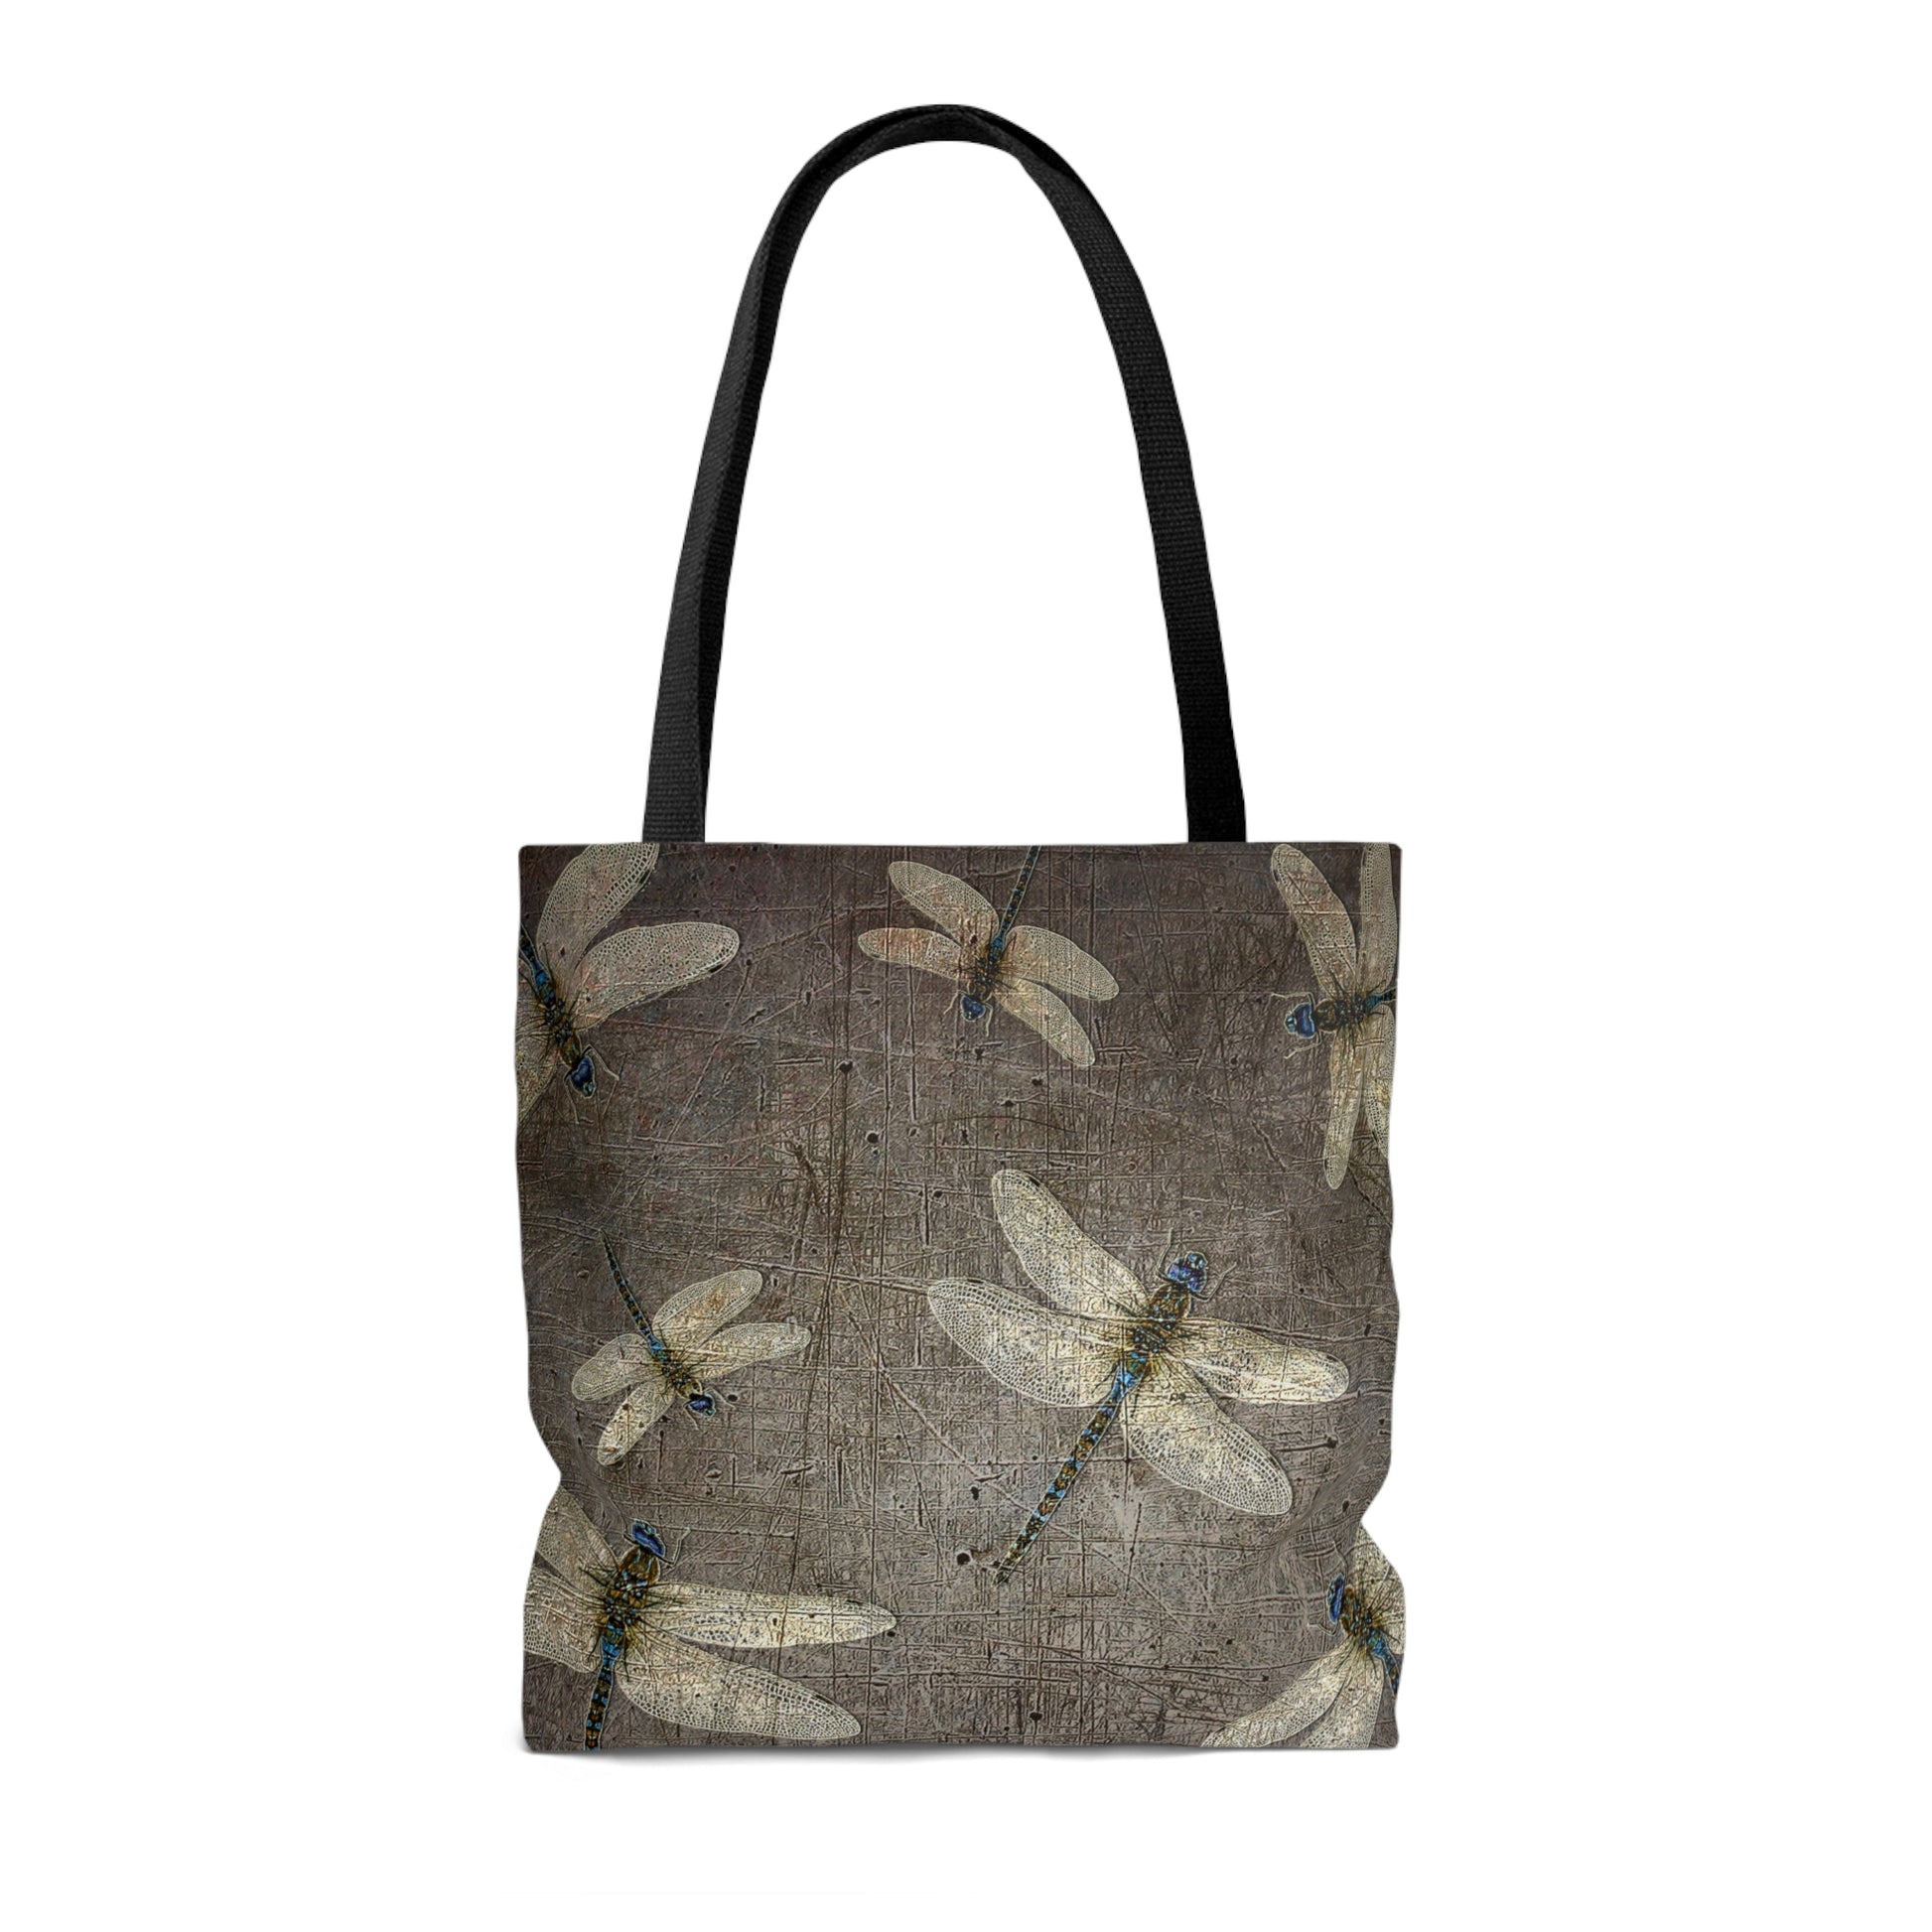 Flight of Dragonflies on Distressed Gray Stone Printed on Tote Bag large front